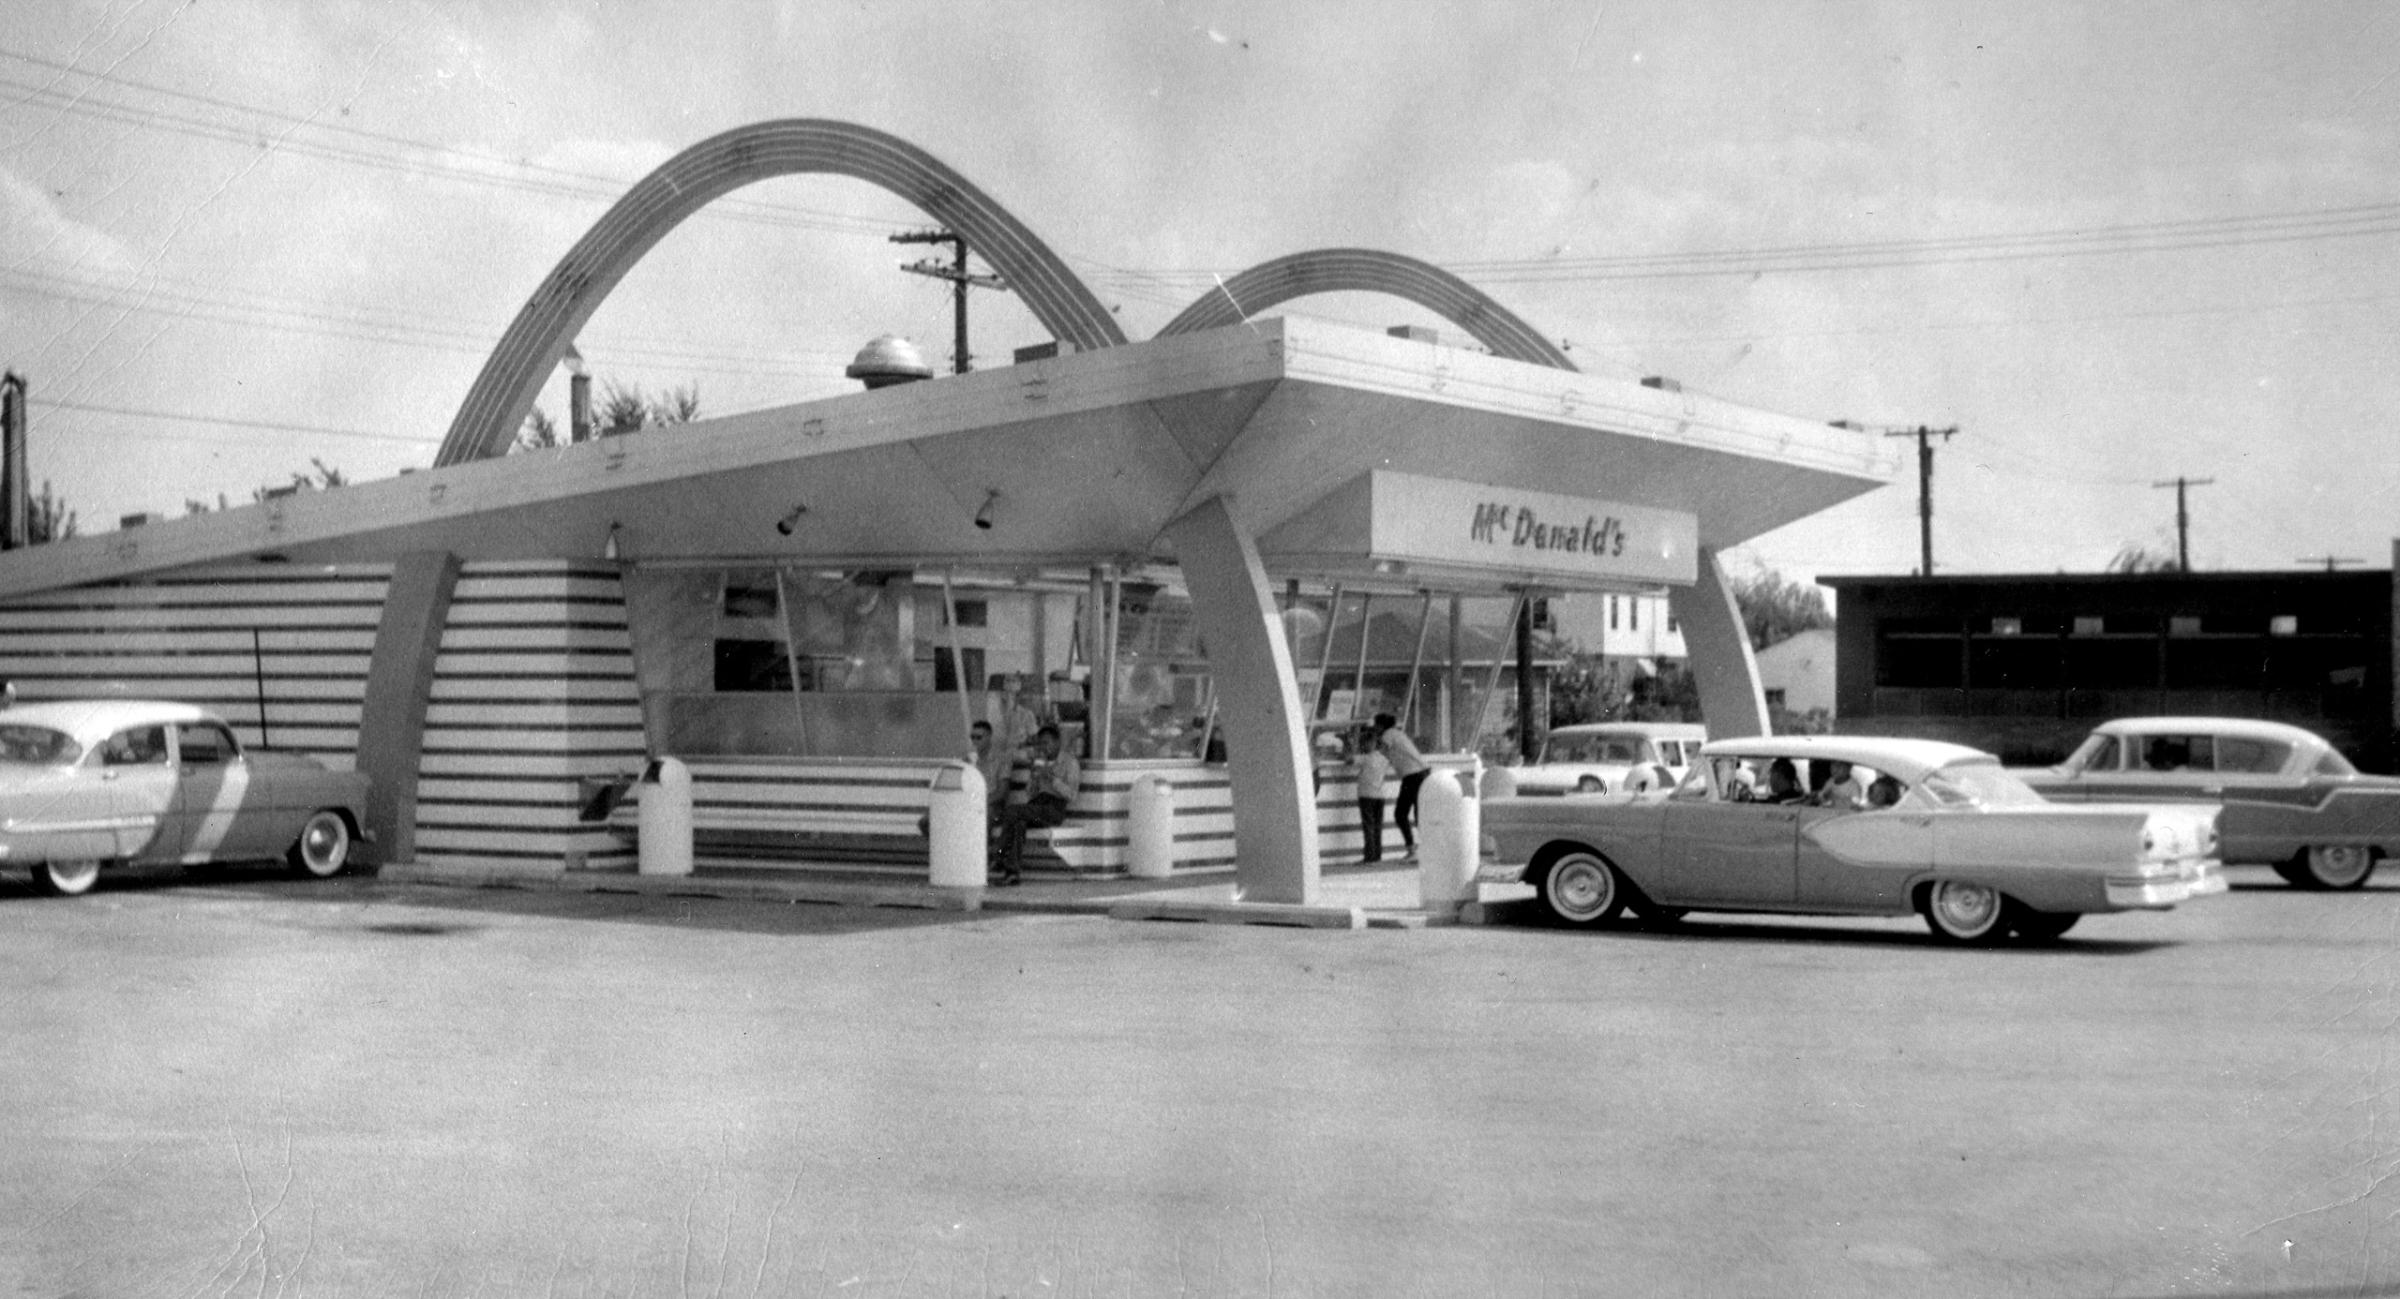 The First Indiana McDonald's Opens in Hammond in 1956.